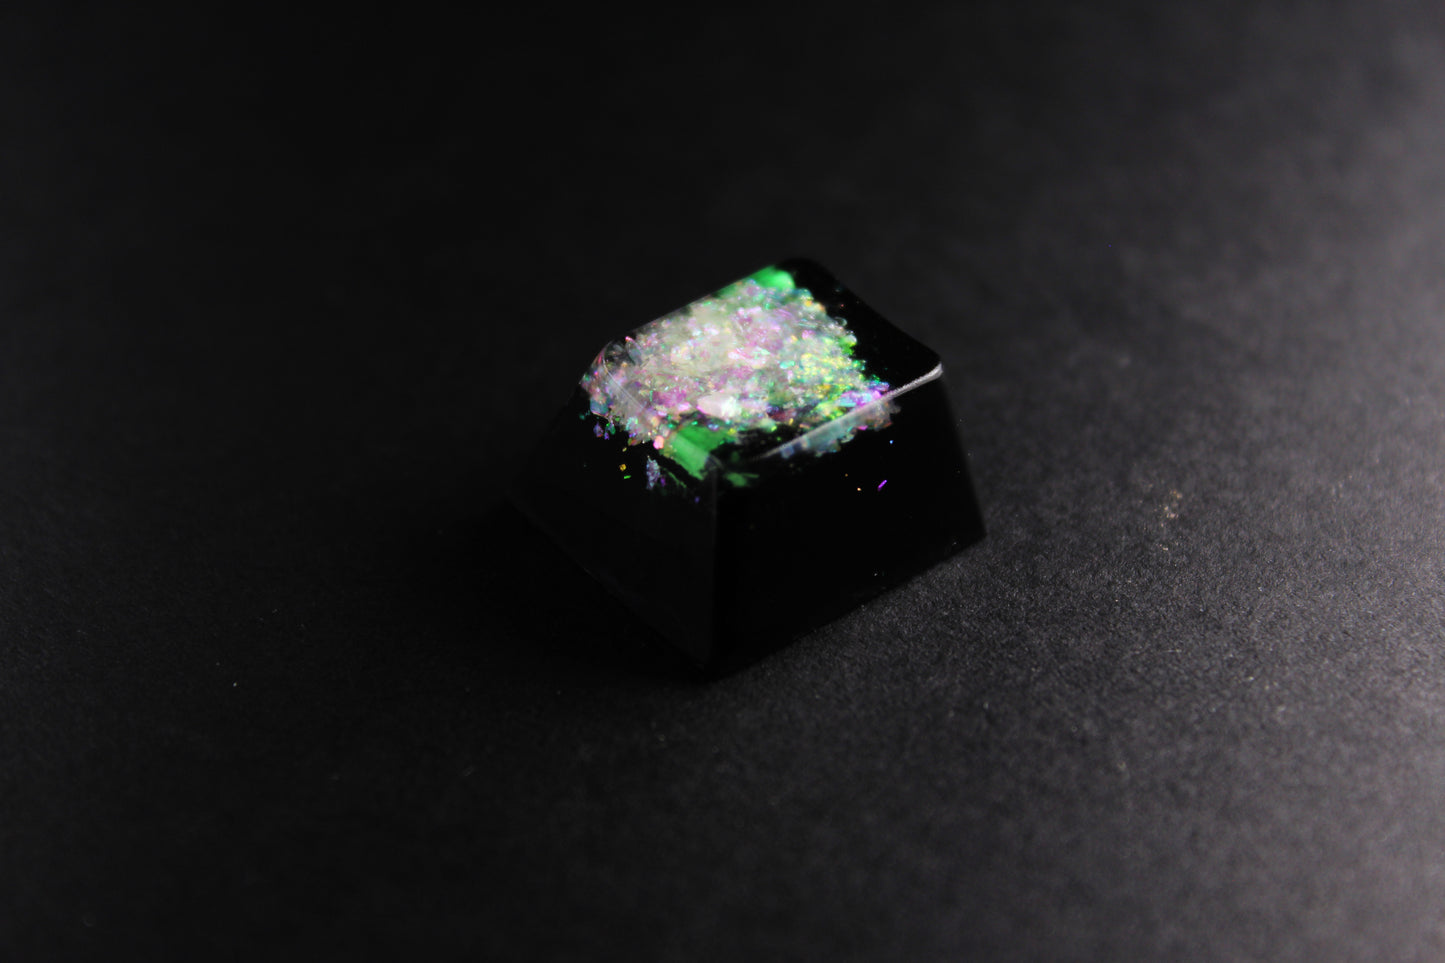 Cherry Esc - Ice Teaser 2 - PrimeCaps Keycap - Blank and Sculpted Artisan Keycaps for cherry MX mechanical keyboards 